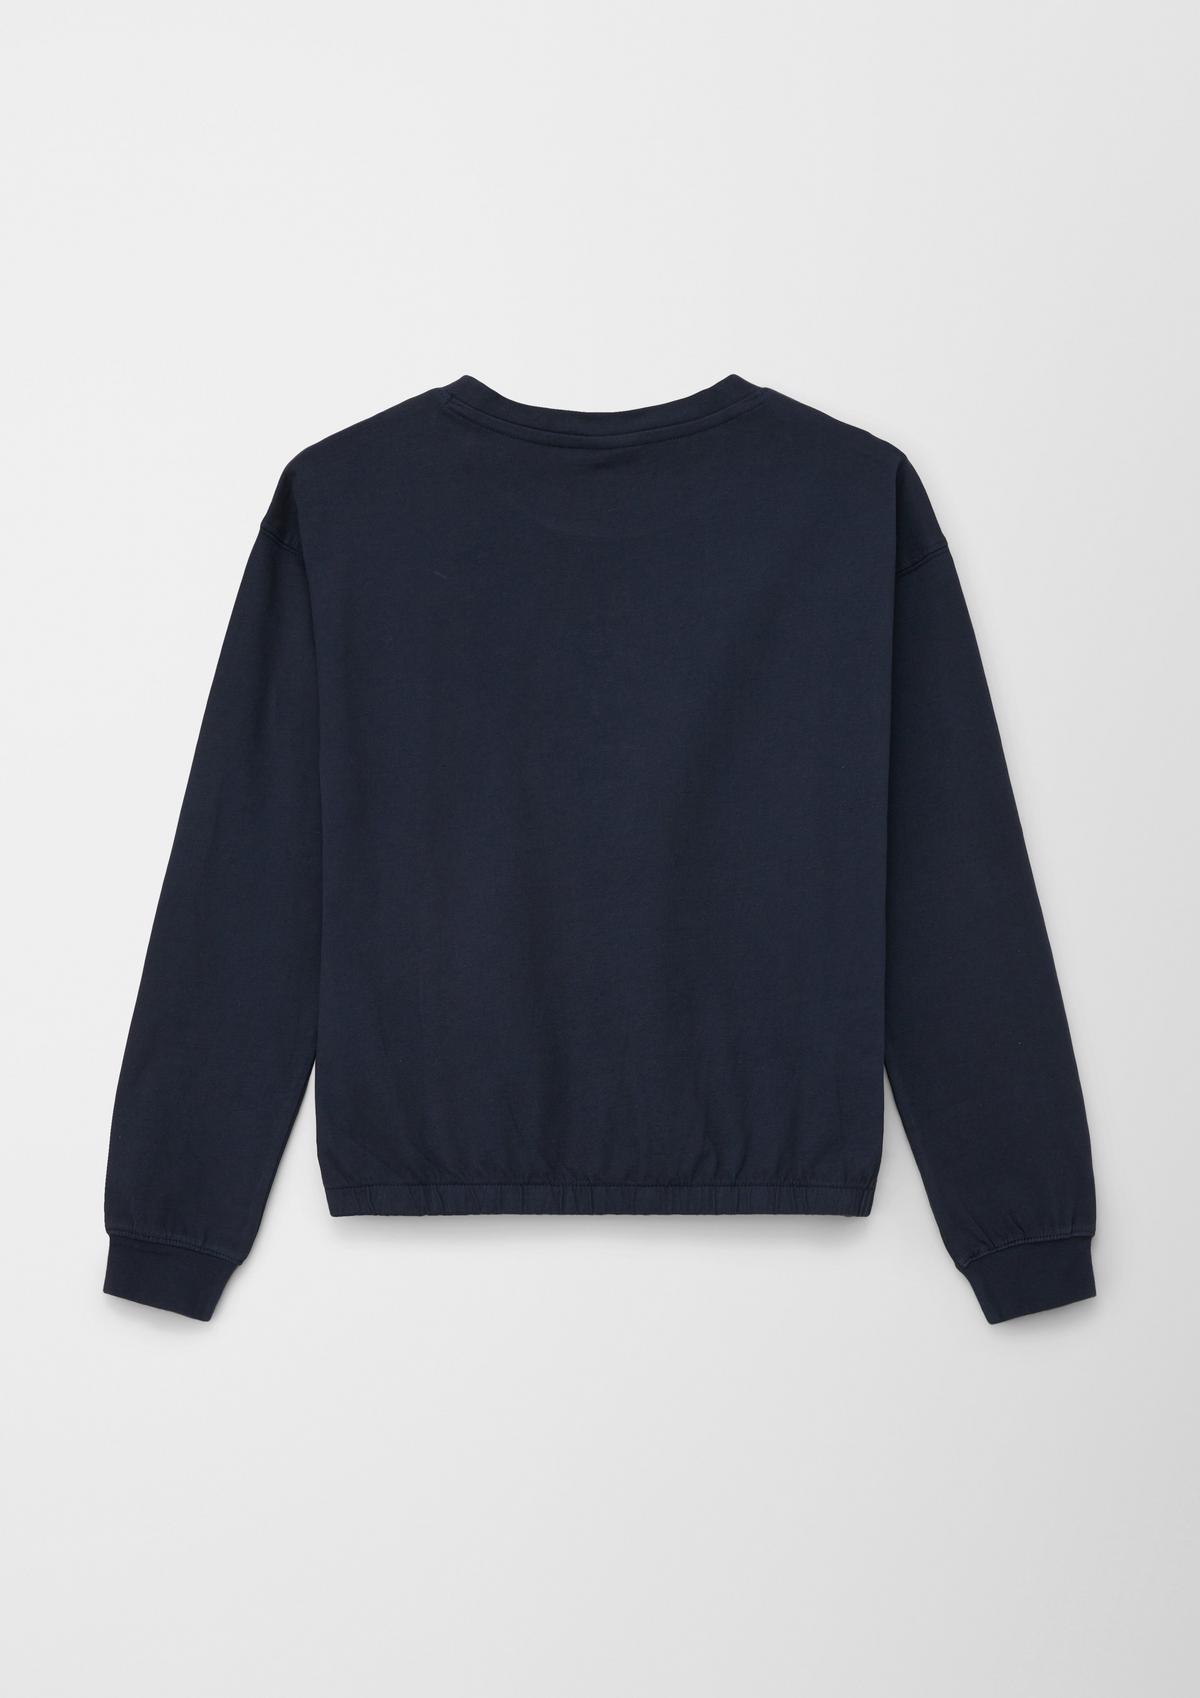 s.Oliver Long sleeve top with embroidery on the front